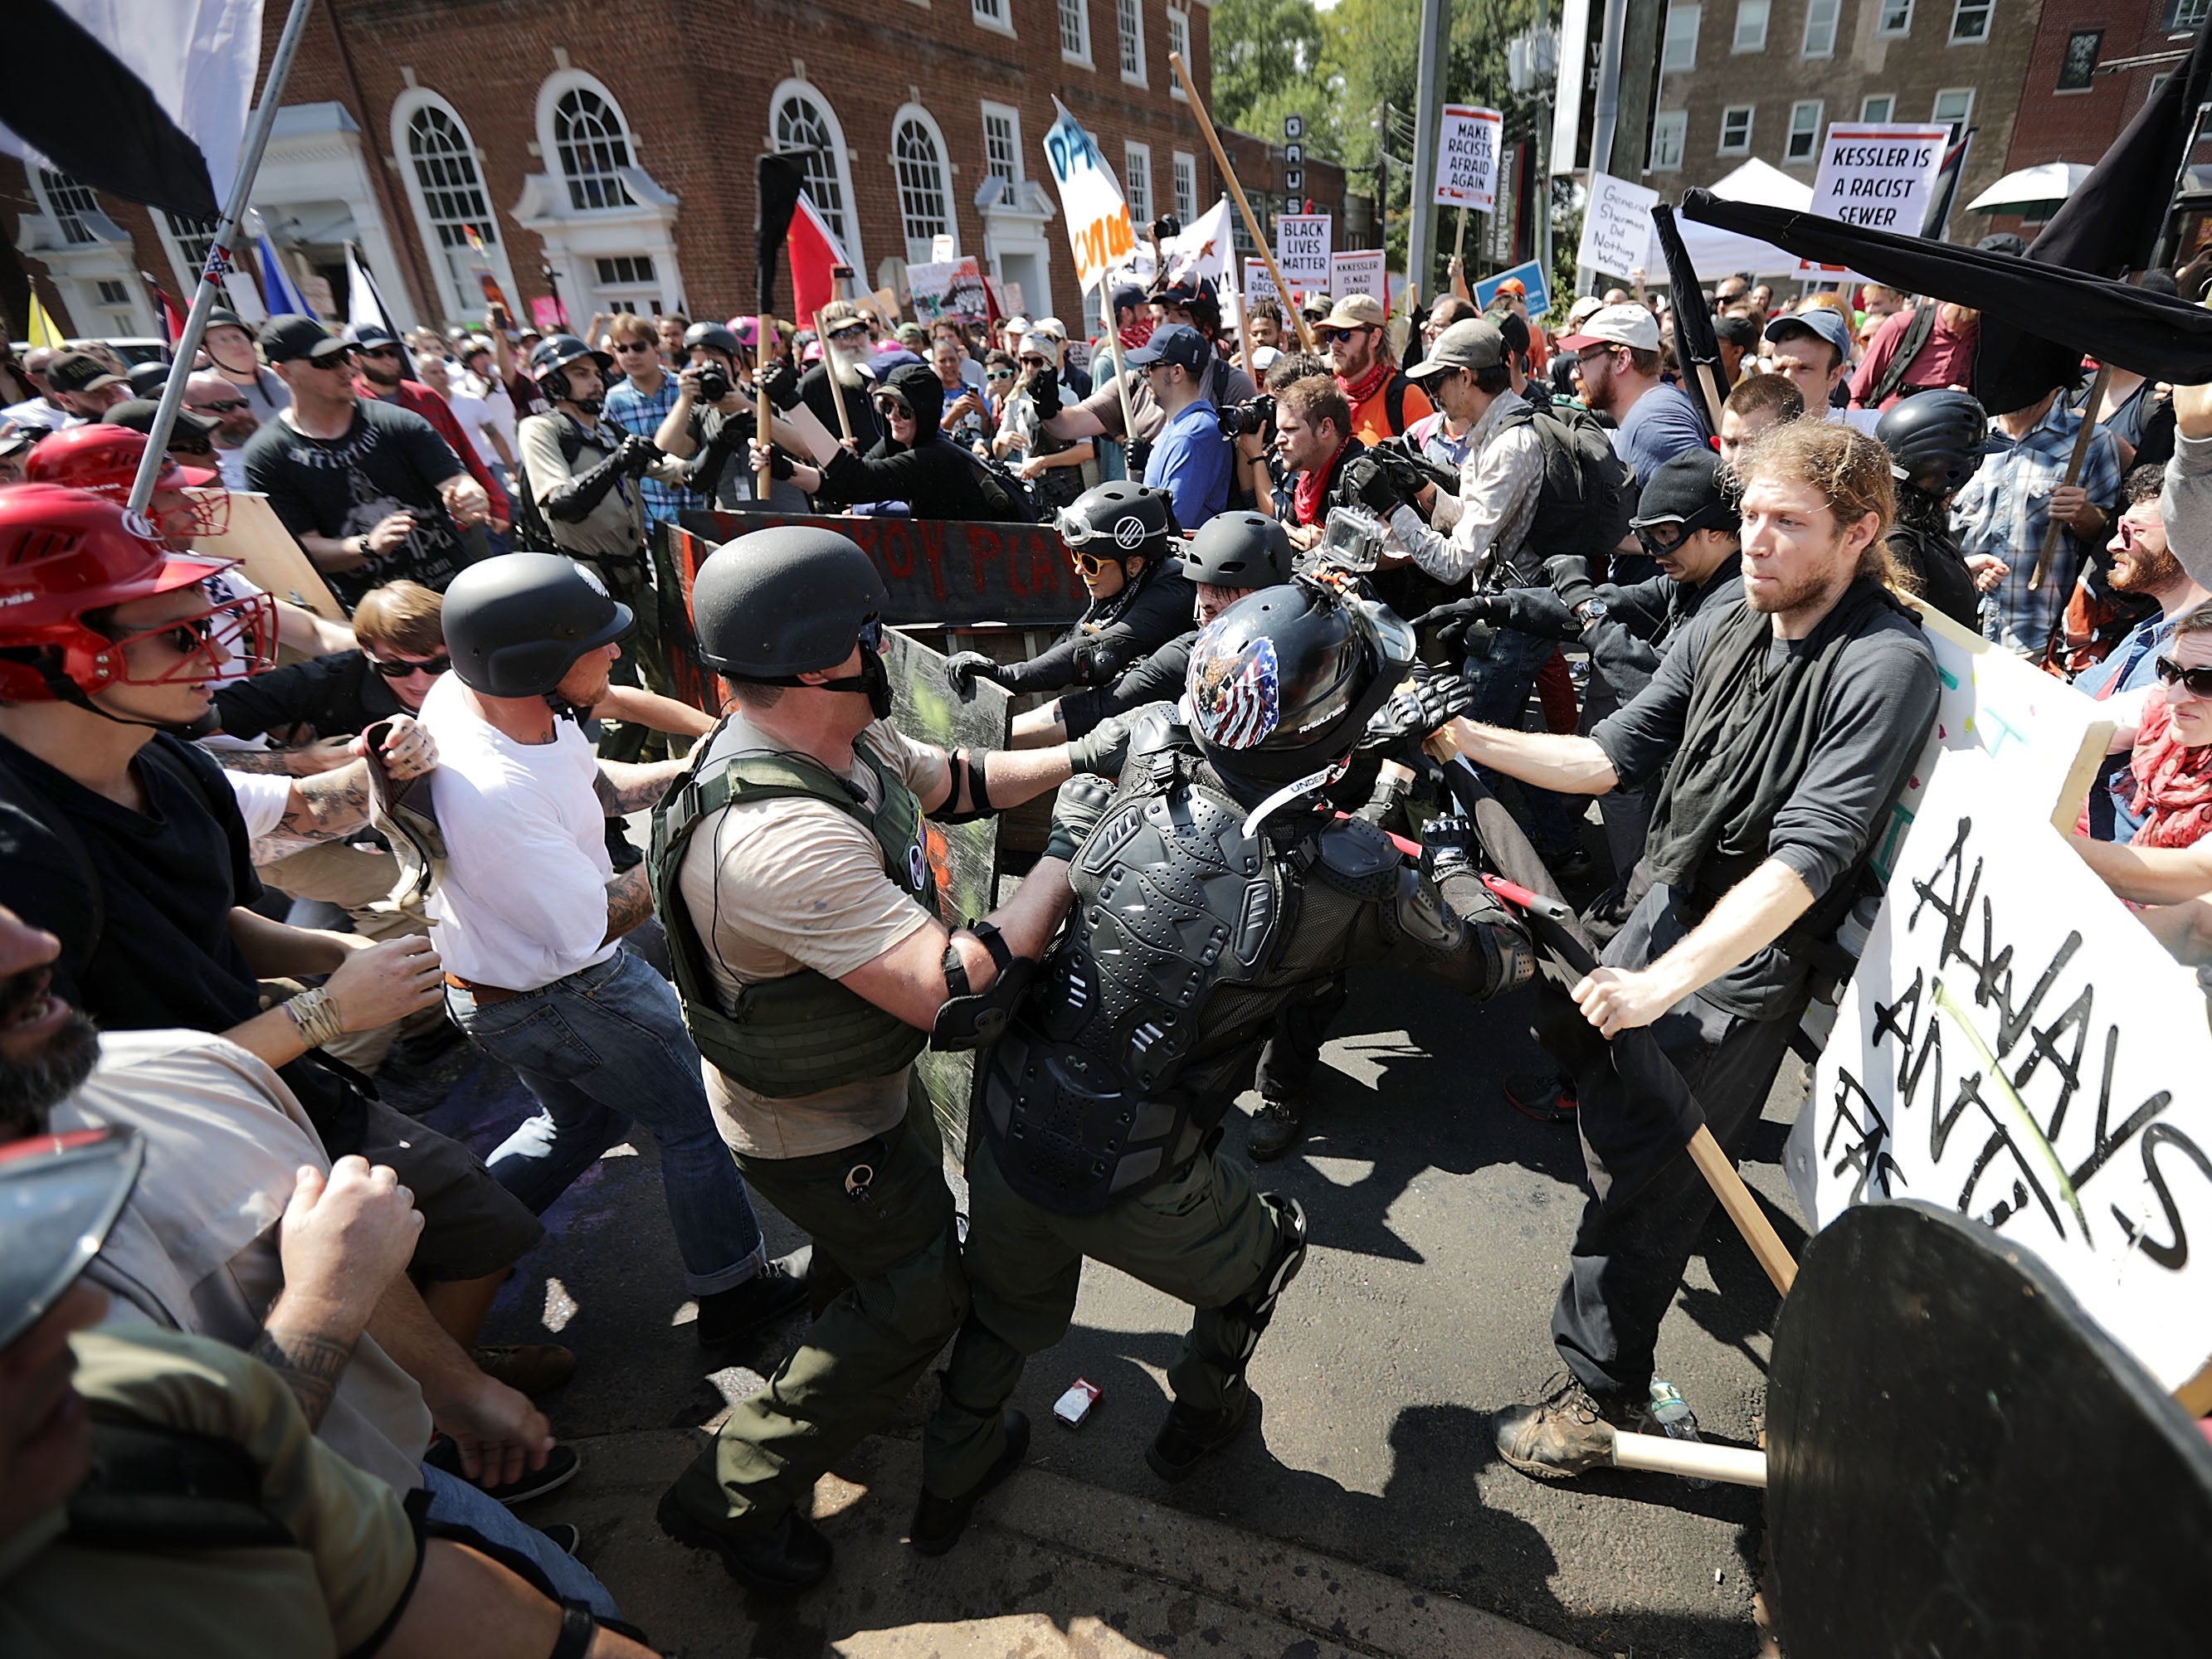 White nationalists, neo-Nazis and members of the alt-right clash with counter-protesters in Virginia